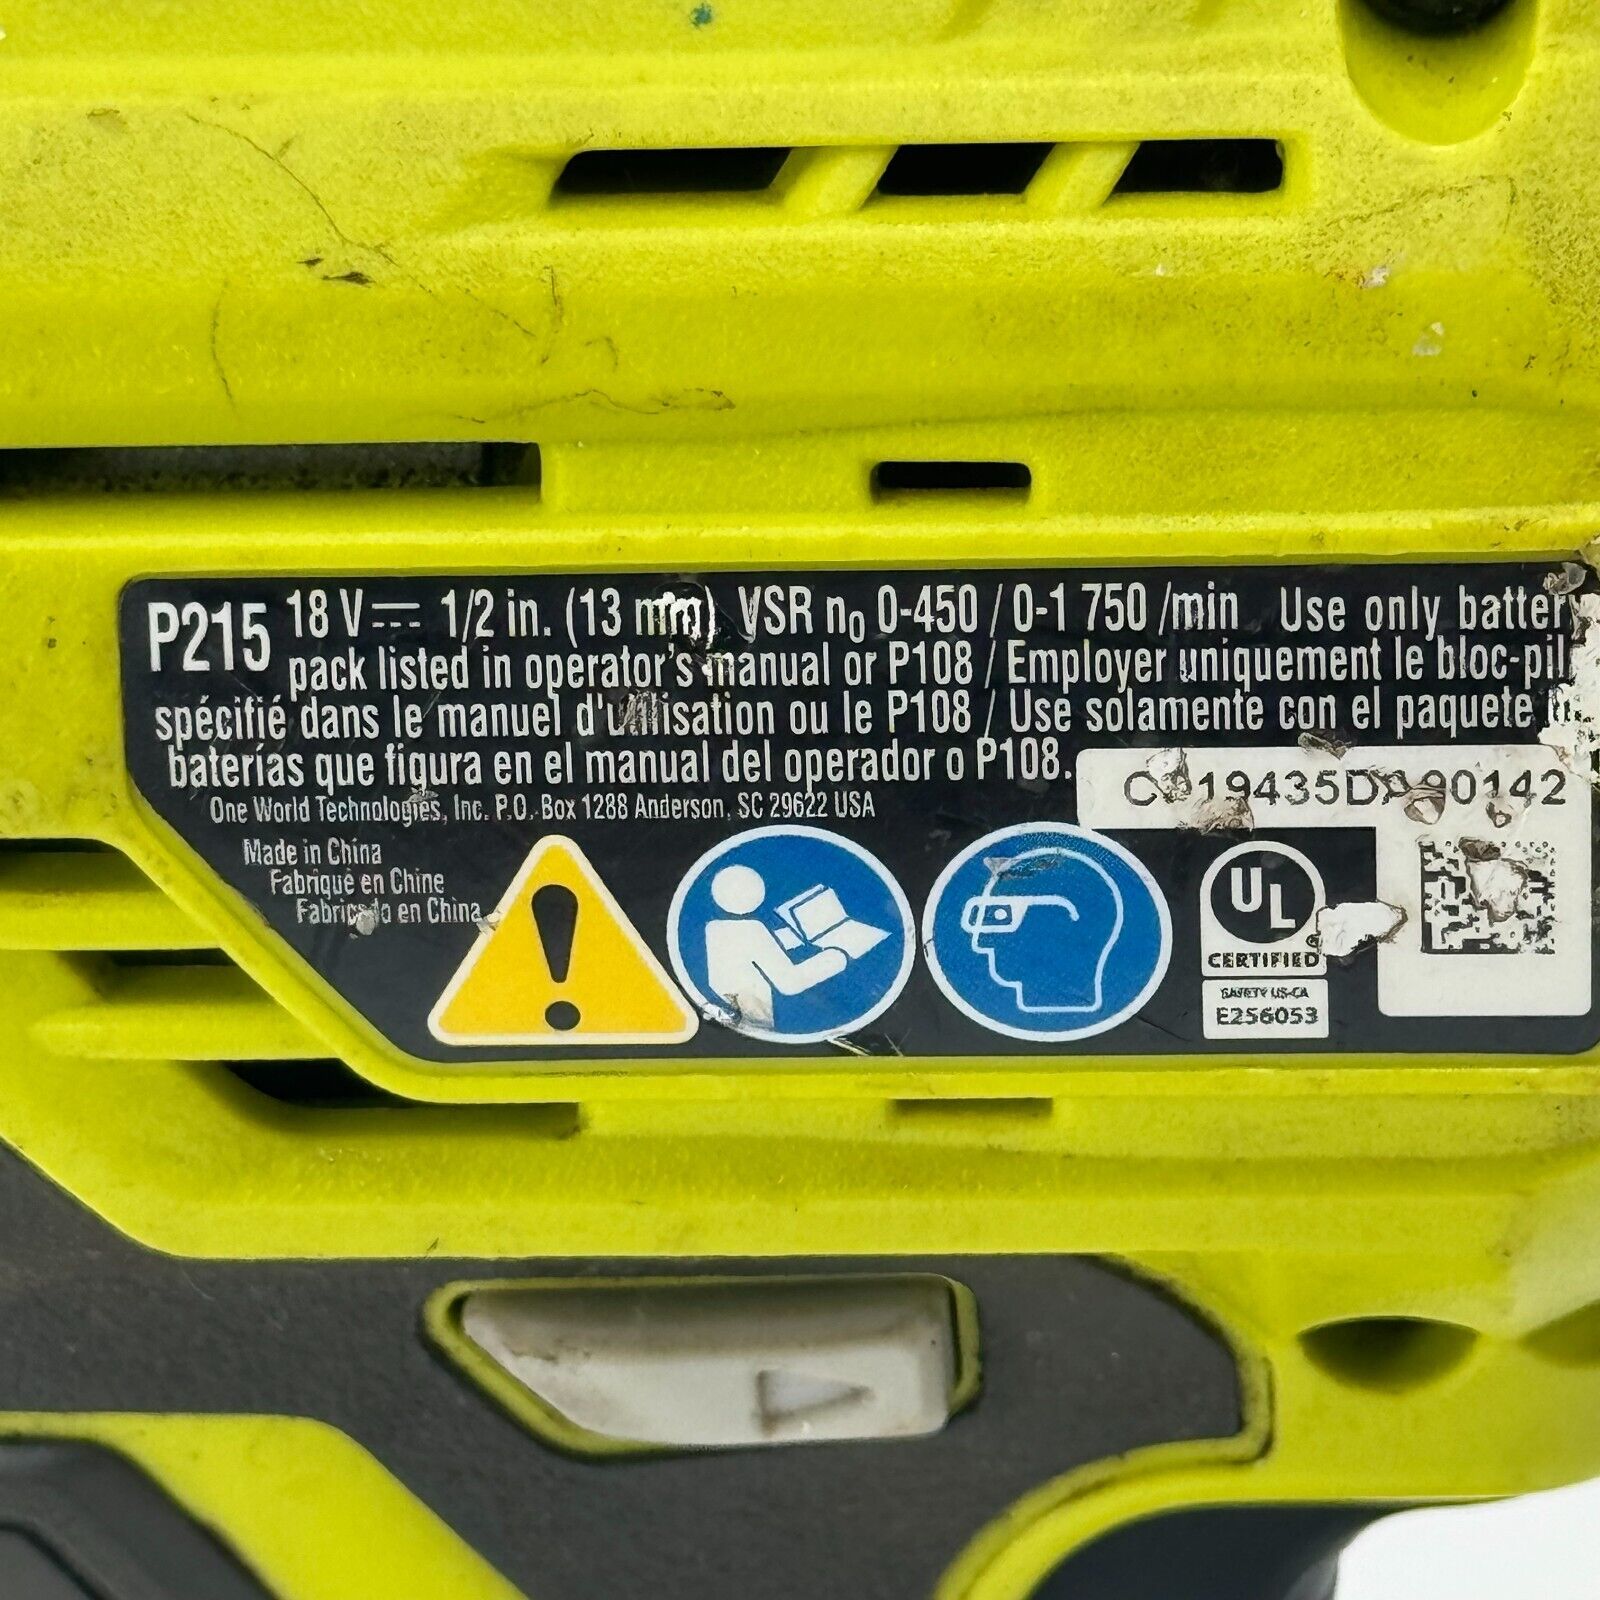 Ryobi One+ One Plus 18V 1/2in Drill & 18 Volt Rechargeable Lithium Battery Pack